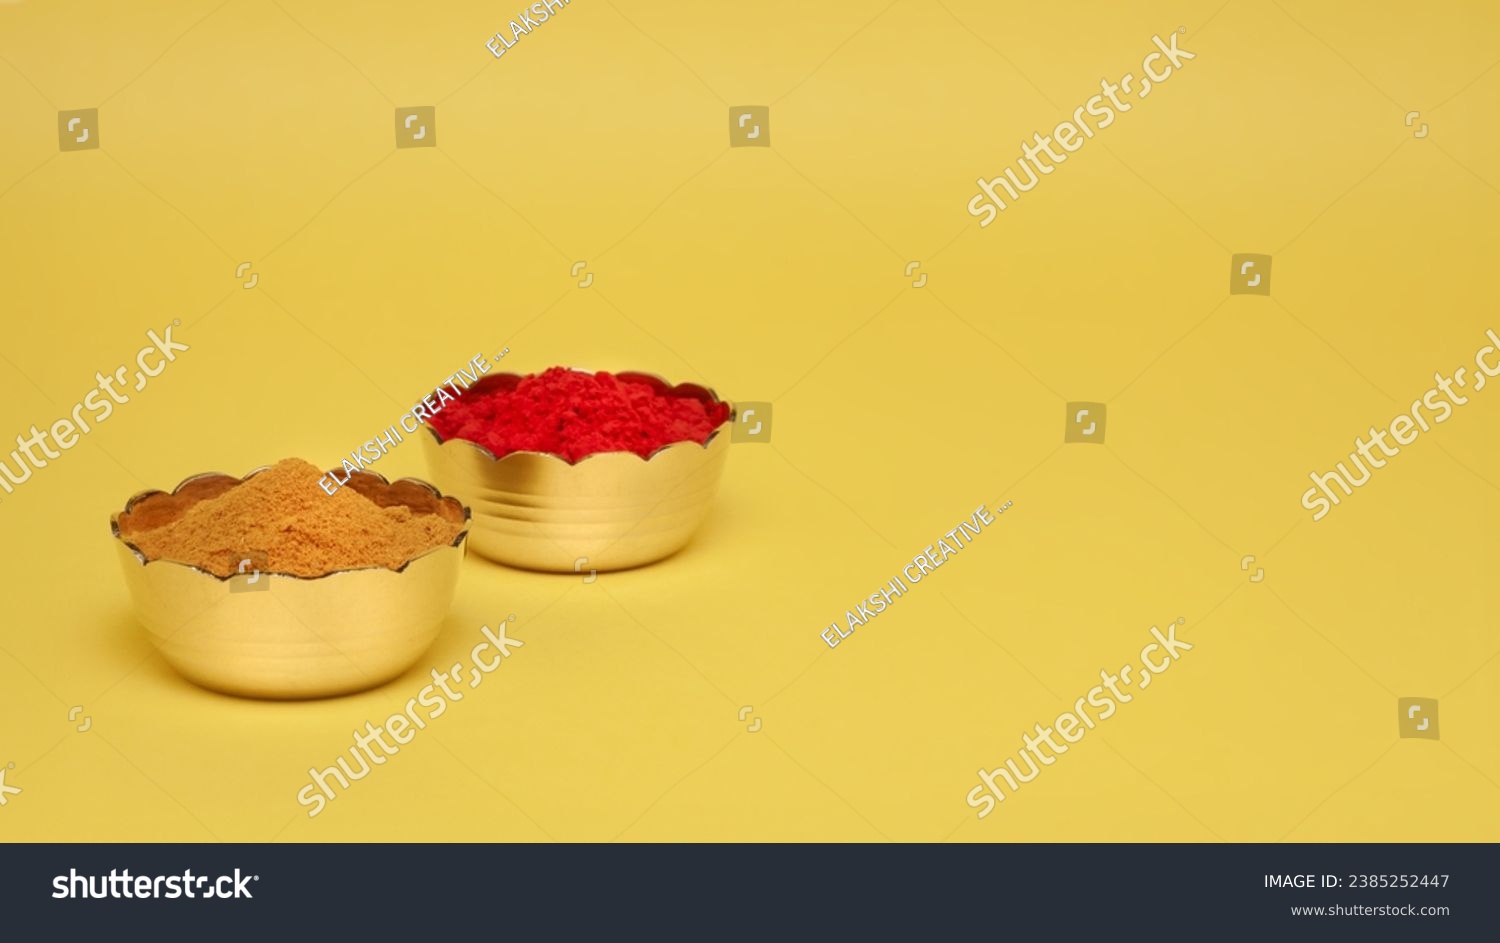 Hindu pooja objects, Auspicious red-colored Sindoor (vermilion) or kumkum, and Haldi in small brass bowls placed over a yellow background.  #2385252447